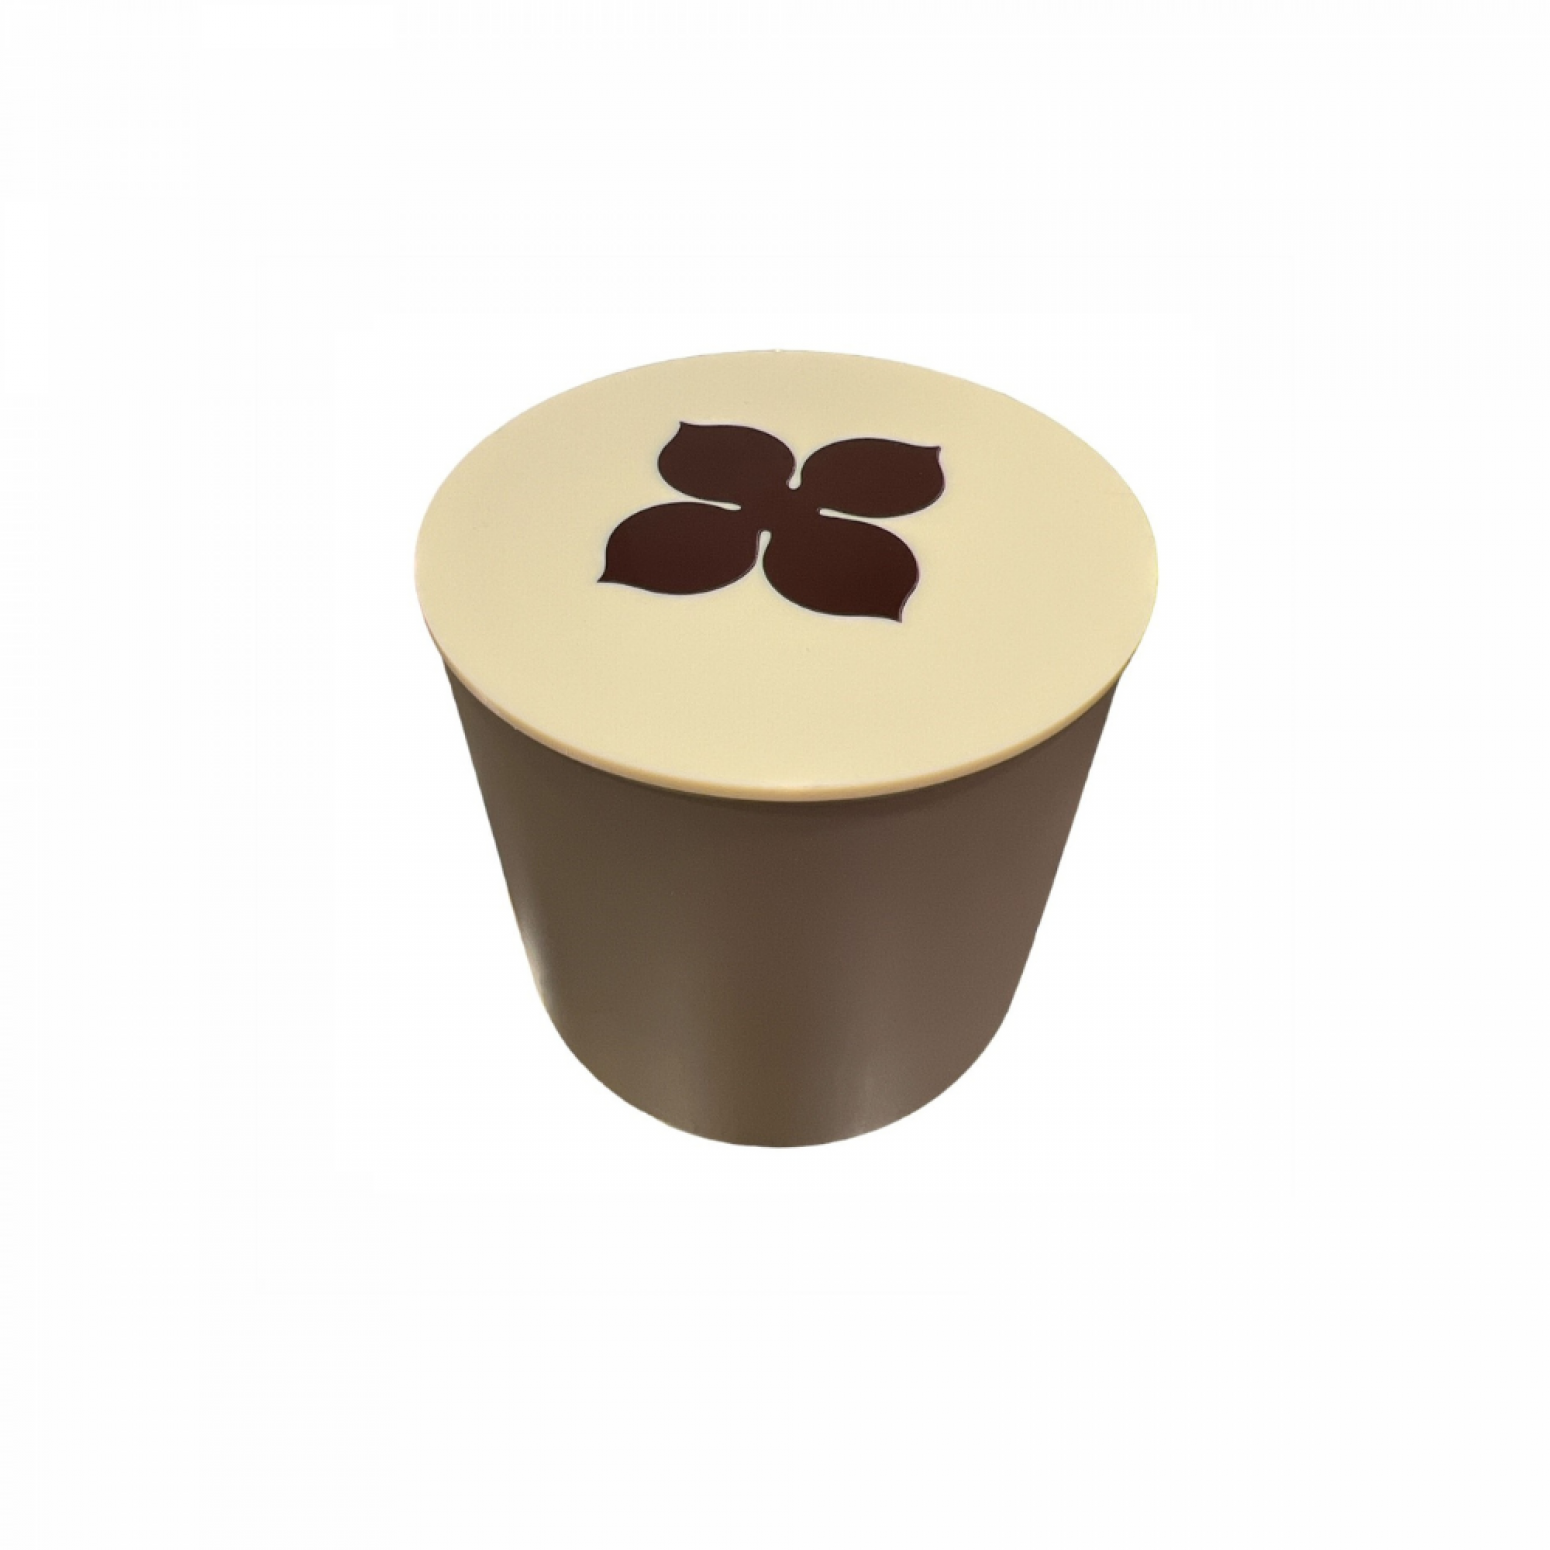 Scented candle with four-leaf clover 12.0cm x 12.0cm, ac1670 GIFTS Κοσμηματα - chrilia.gr